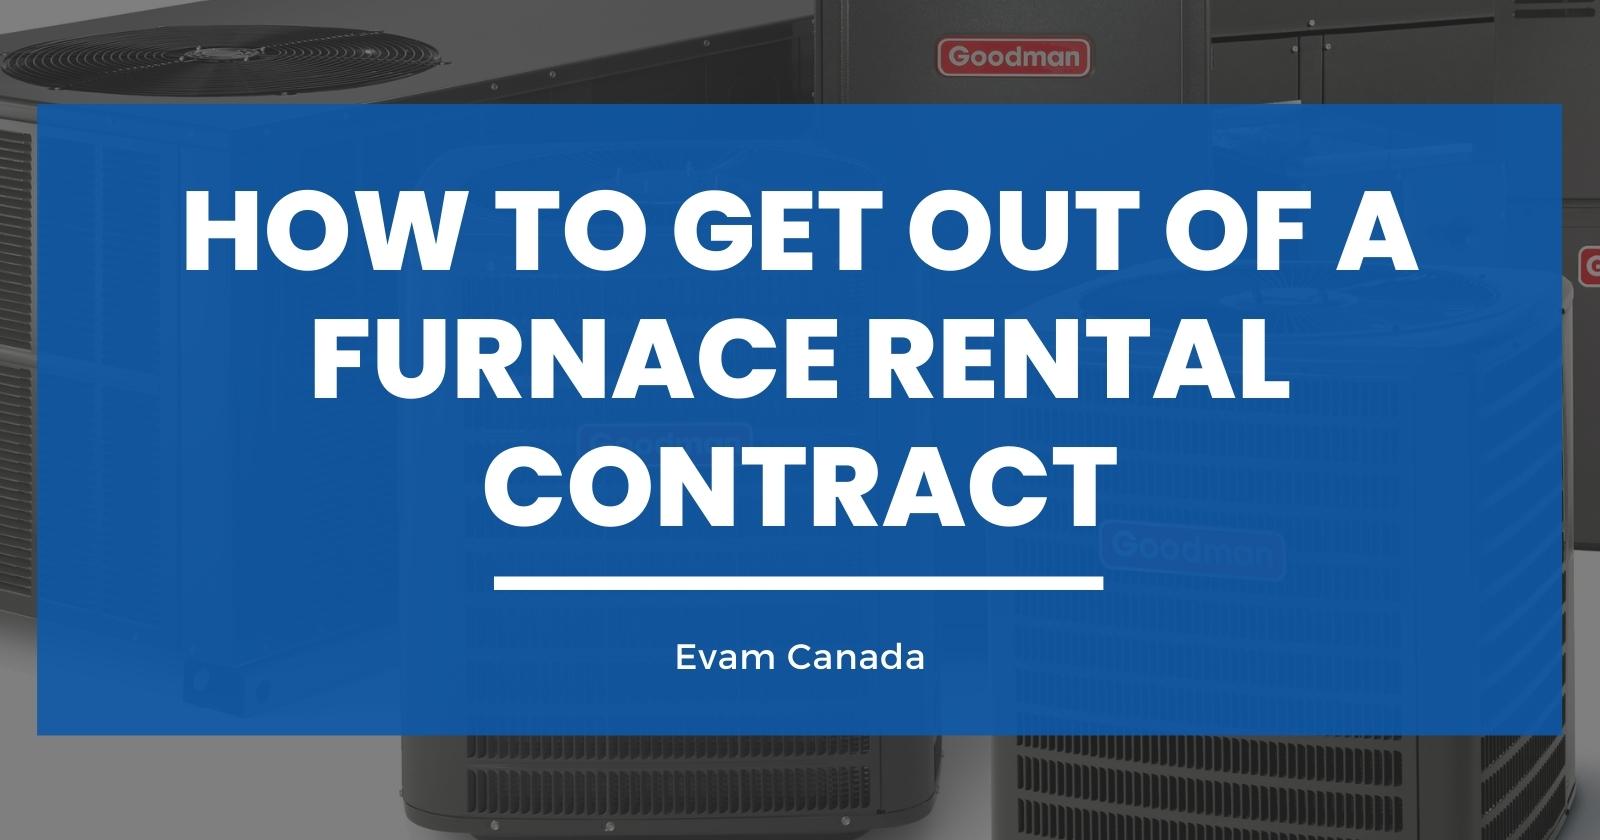 How to Get Out of a Furnace Rental Contract